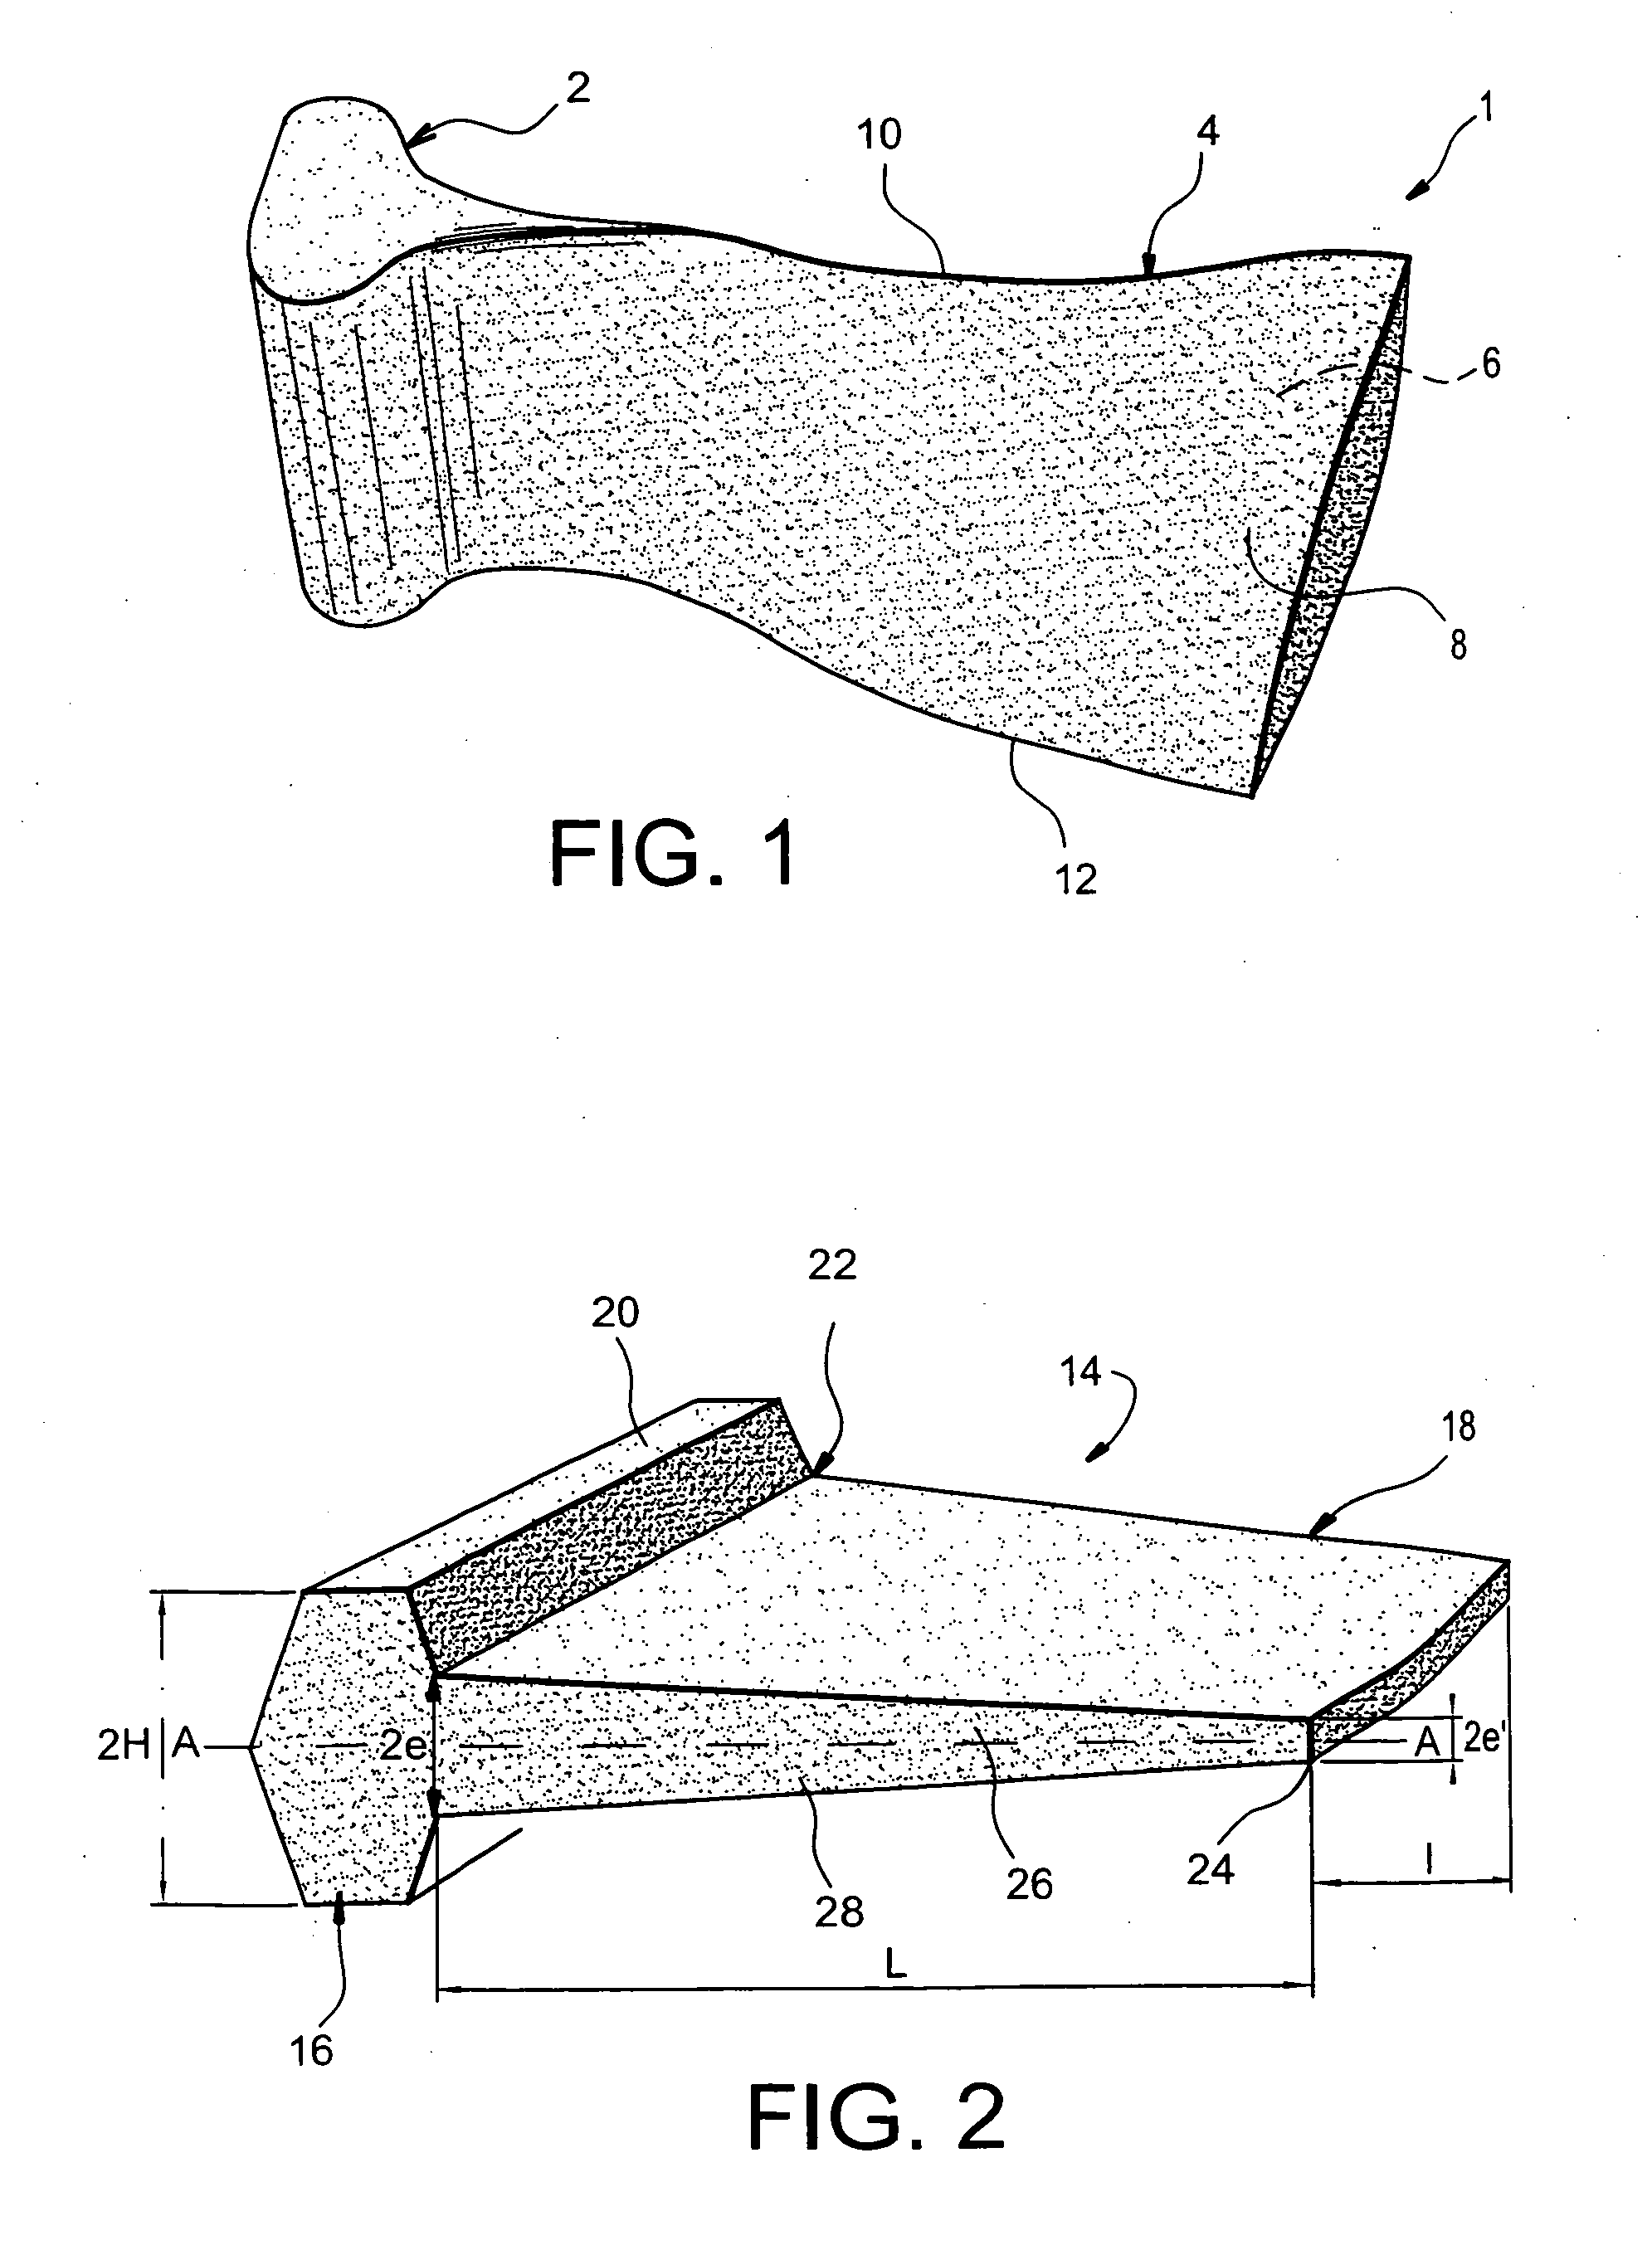 Method for manufacturing constituents of a hollow blade by press forging